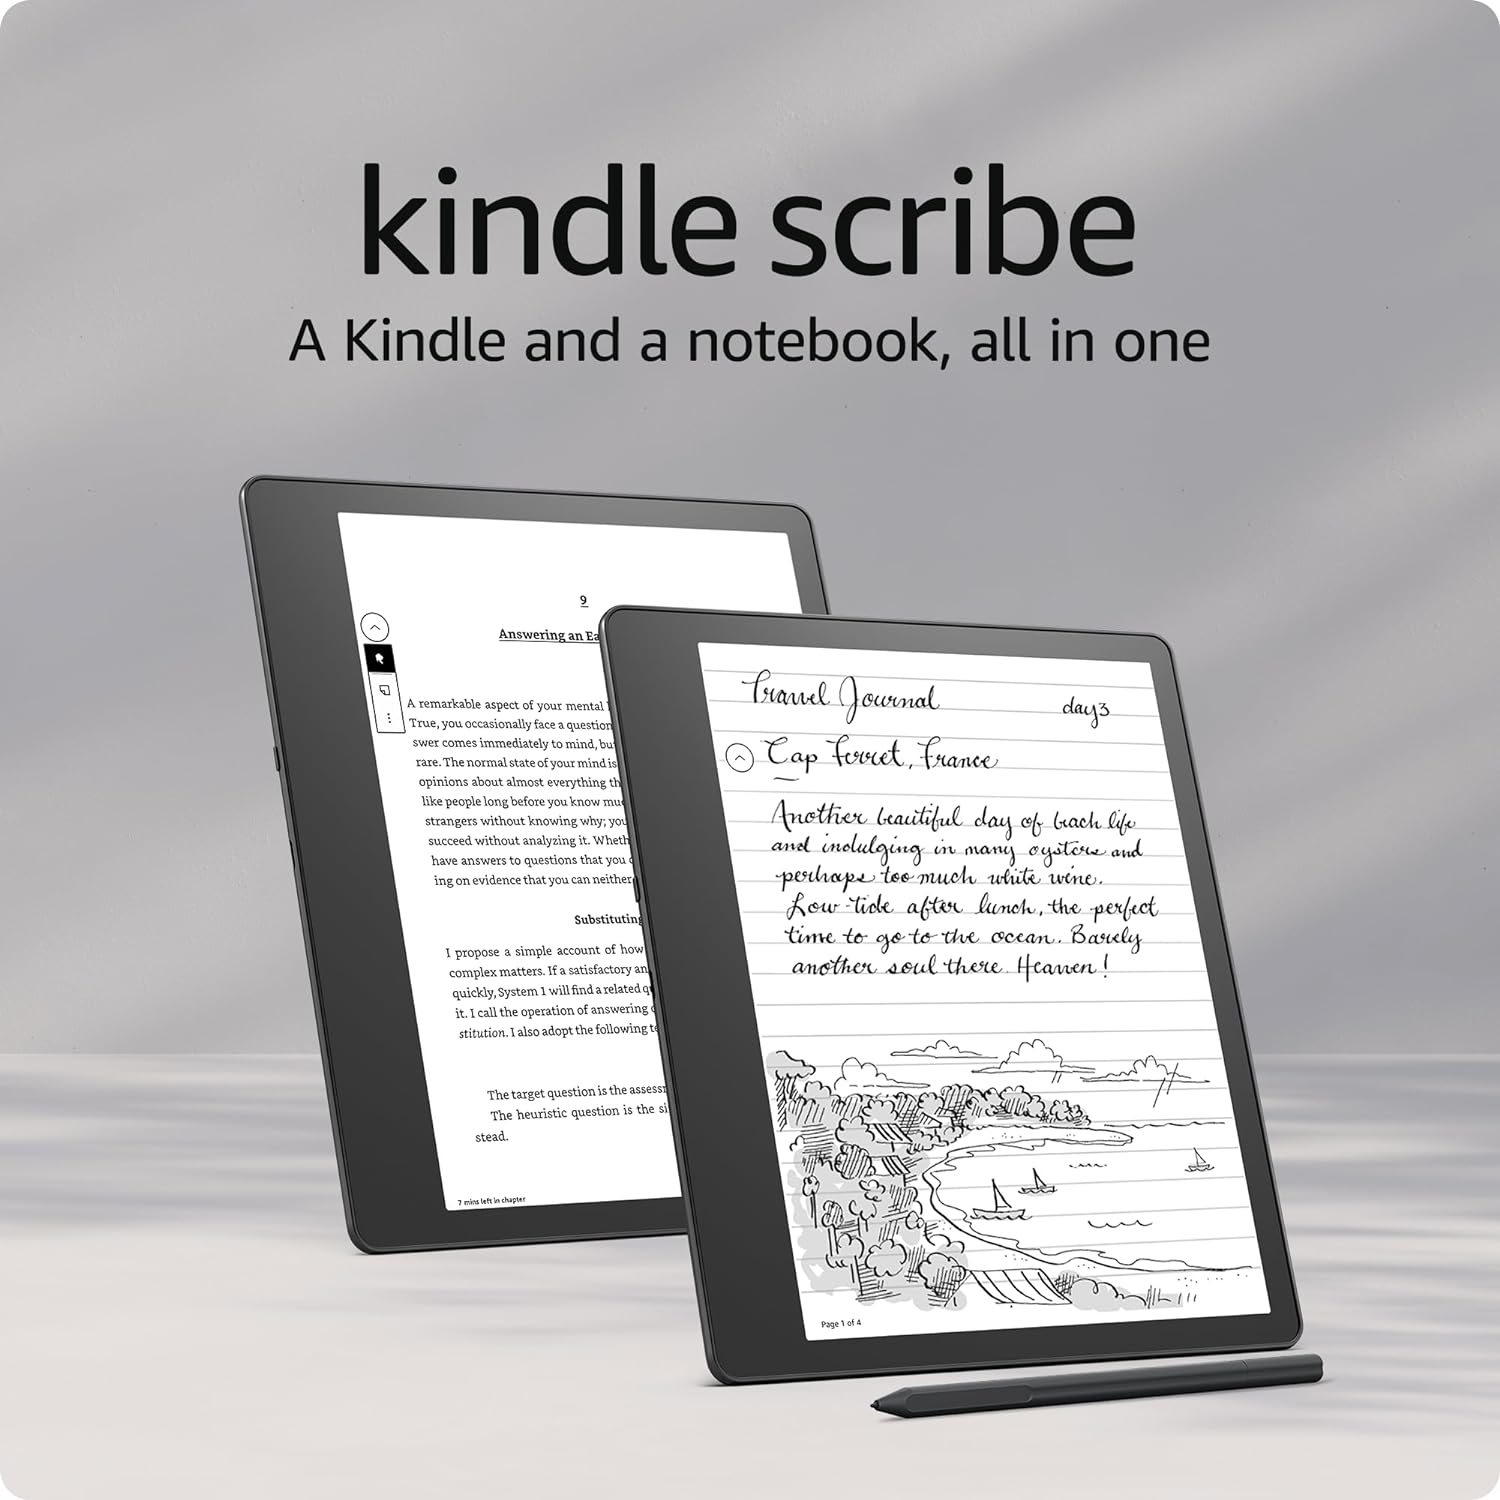 Amazon Kindle Scribe (64 GB) the first Kindle and digital notebook